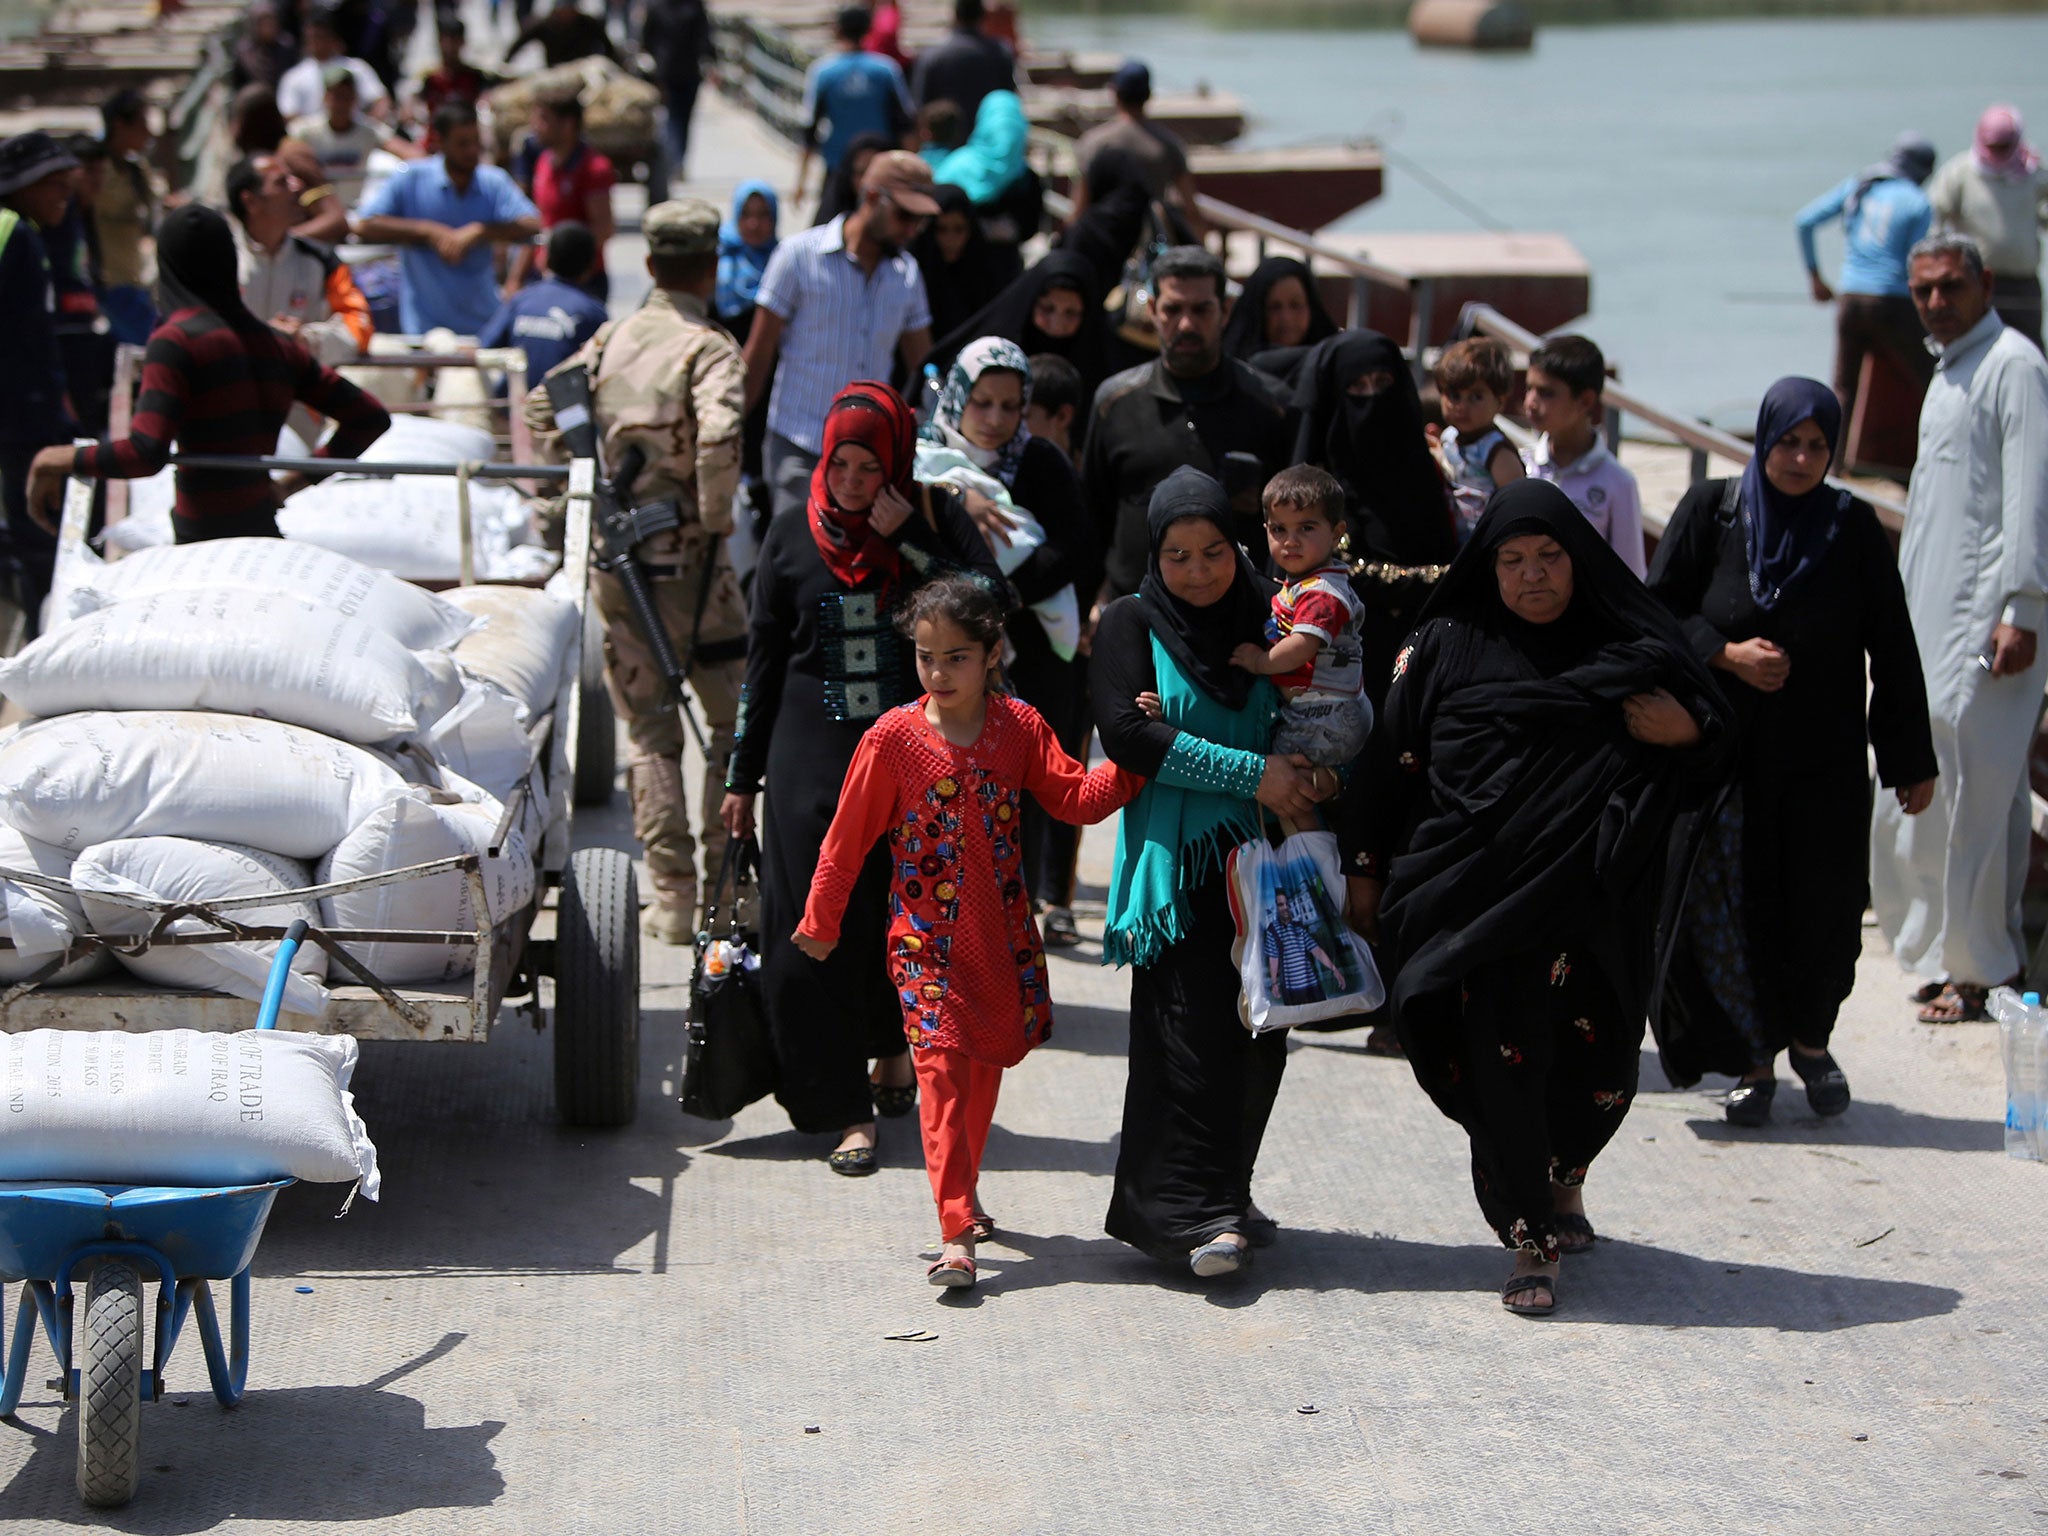 Sunni Iraqis fleeing violence in Ramadi arriving in Baghdad; more than 90,000 people have fled fighting between pro-government forces and Isis in the Ramadi area